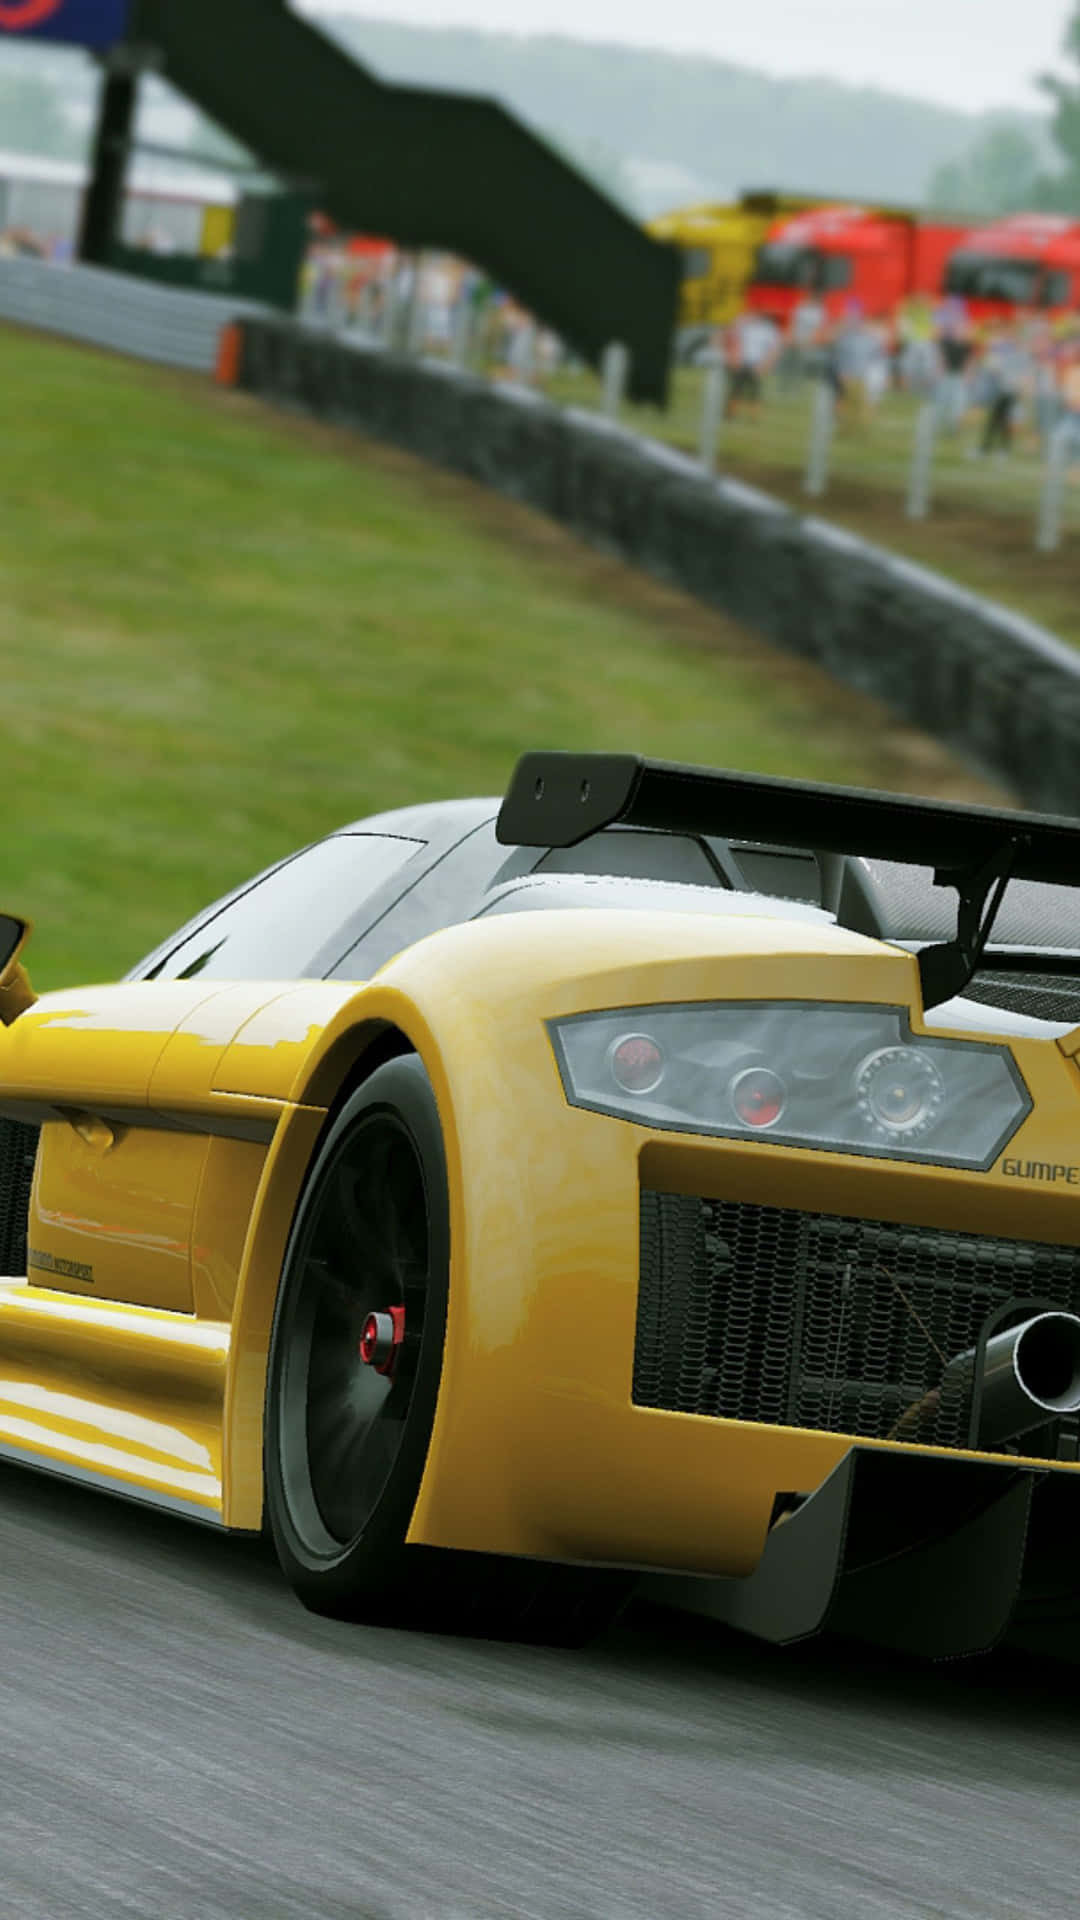 Enjoy the adrenaline rush with Project Cars on Android